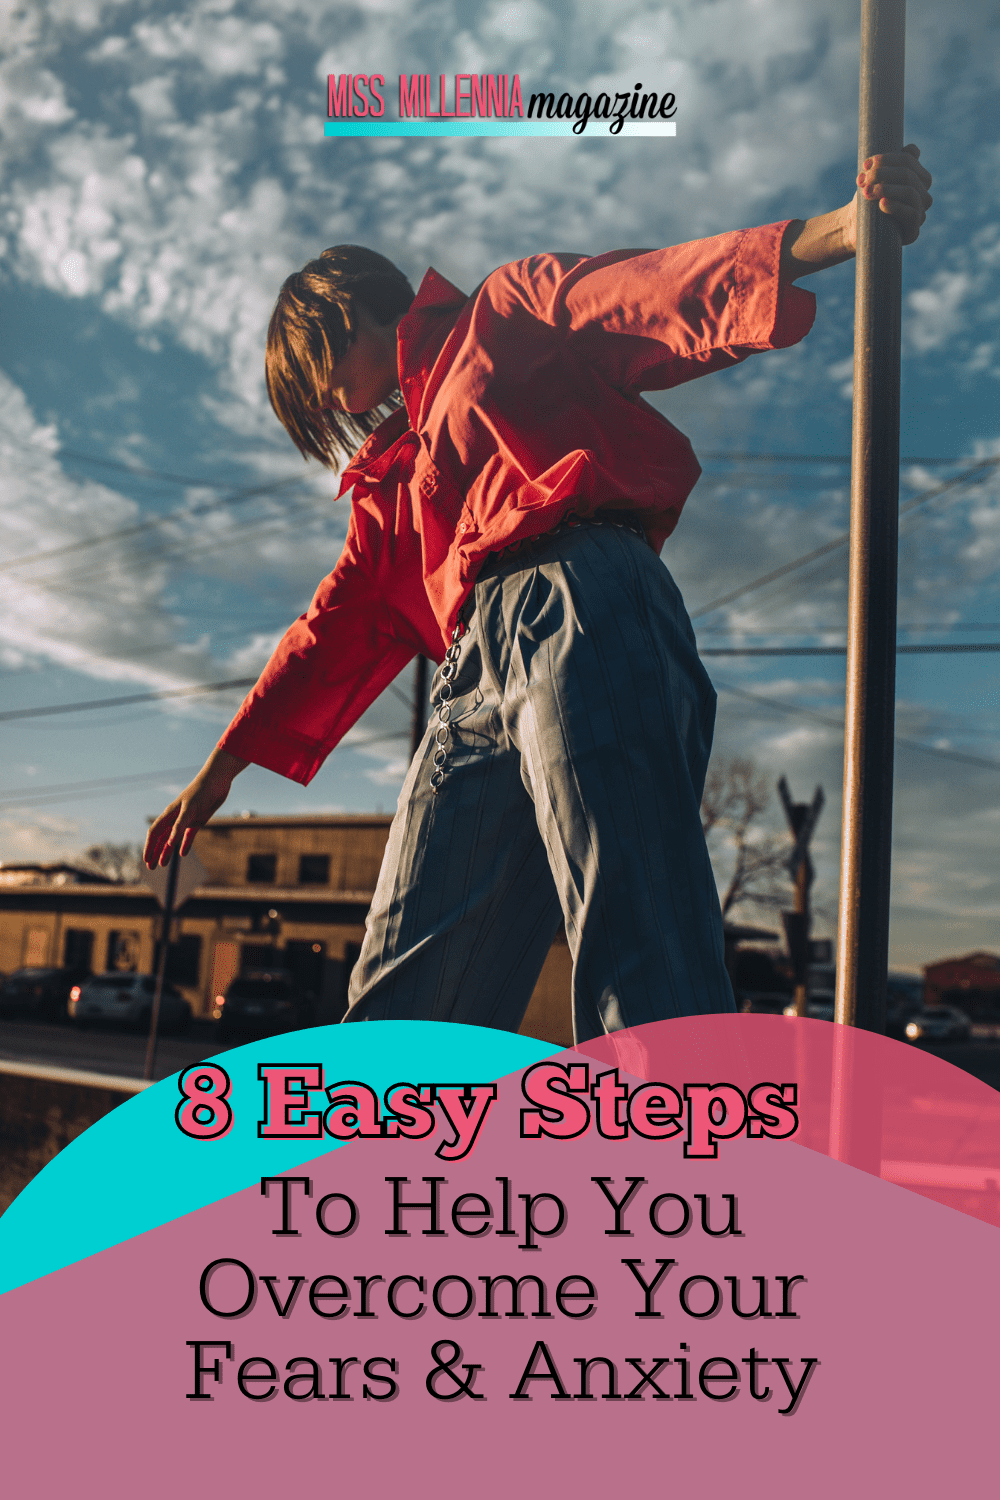 8 Easy Steps To Help You Overcome Your Fears & Anxiety